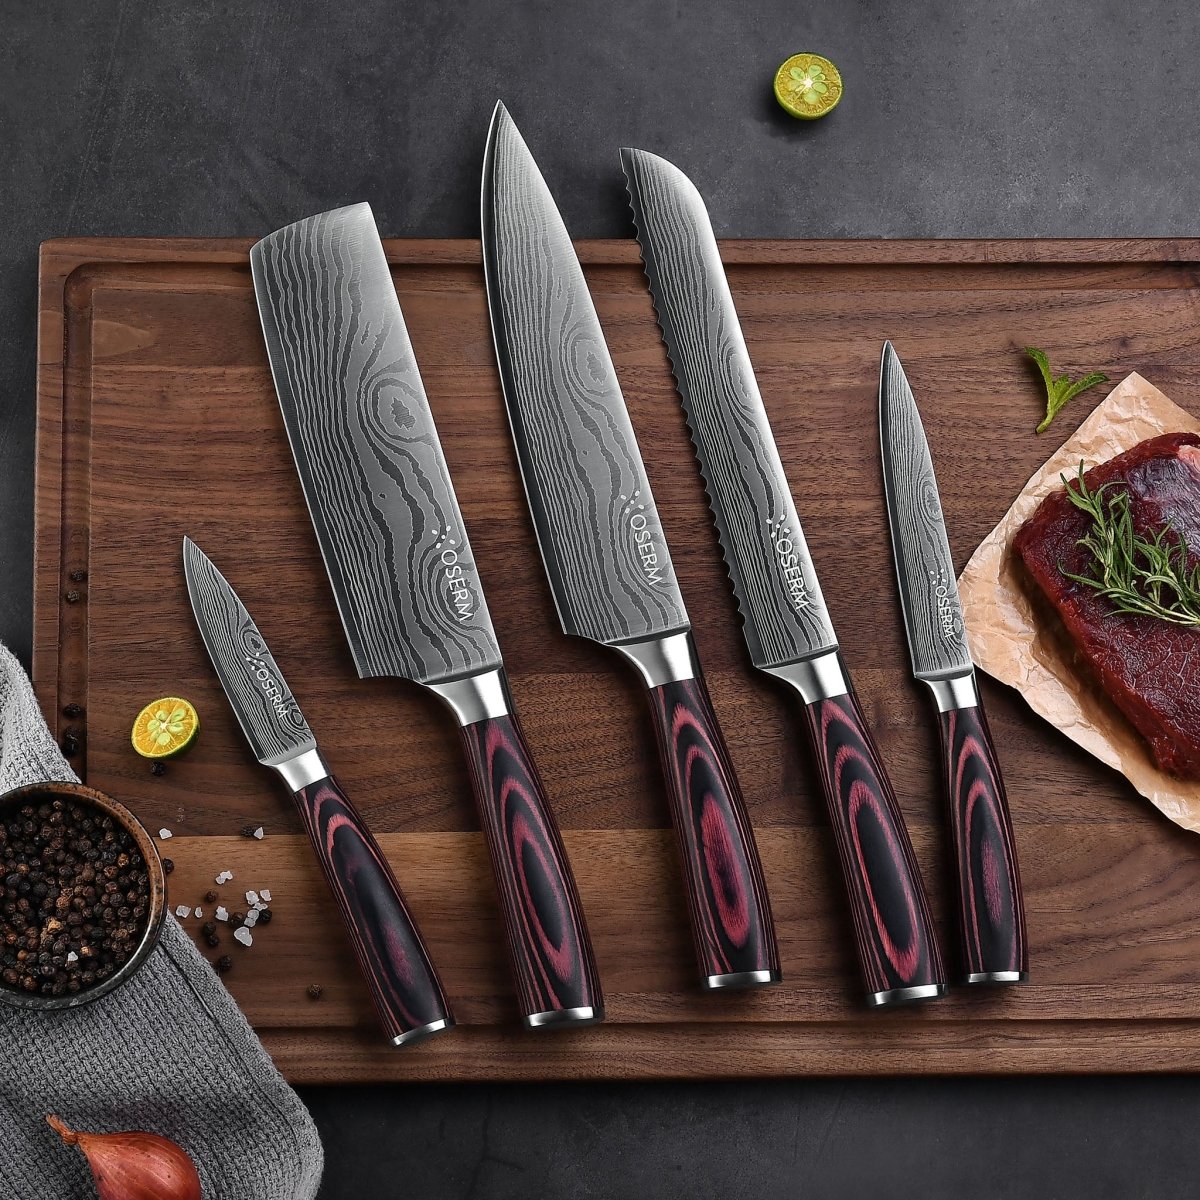 OSERM 5+1 Mystery Knife Set: Unveil Your Surprise with Premium High Carbon Stainless Steel Chef Knives & Exclusive Blind Box Bonus